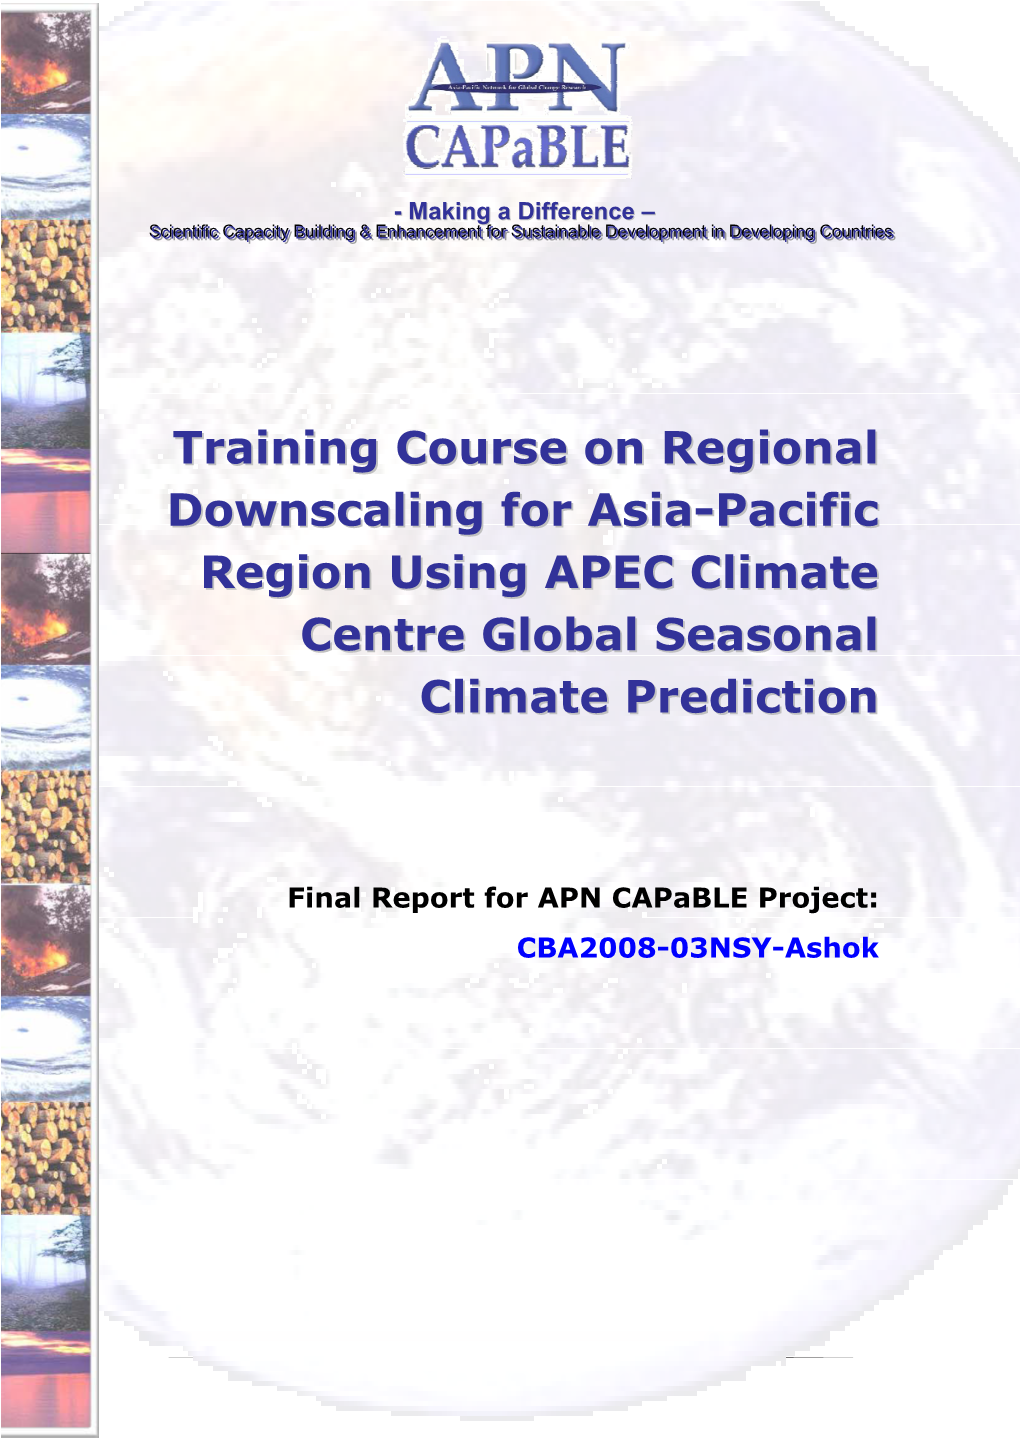 Training Course on Regional Downscaling for Asia-Pacific Region Using APEC Climate Centre Global Seasonal Climate Prediction